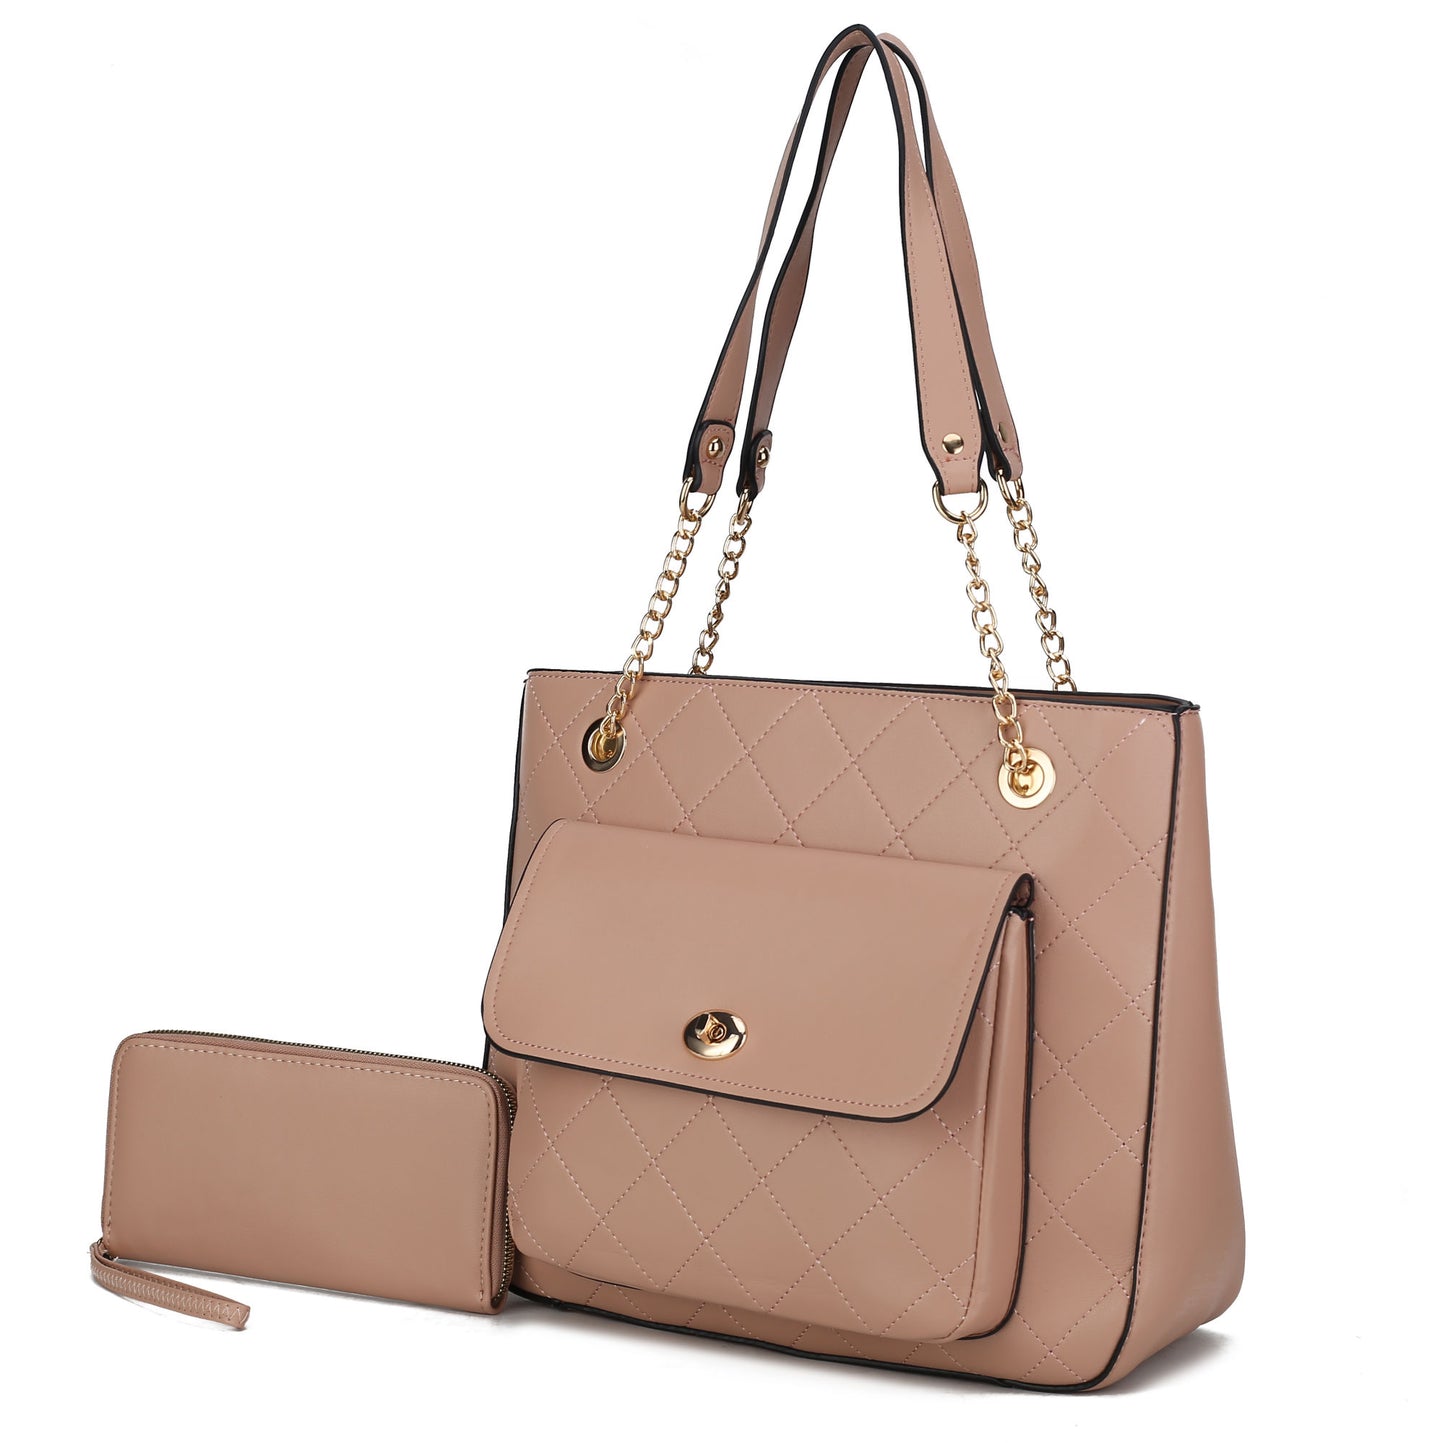 MKF Collection Jenna Shoulder Bag by Mia k and Wallet- 2 pieces